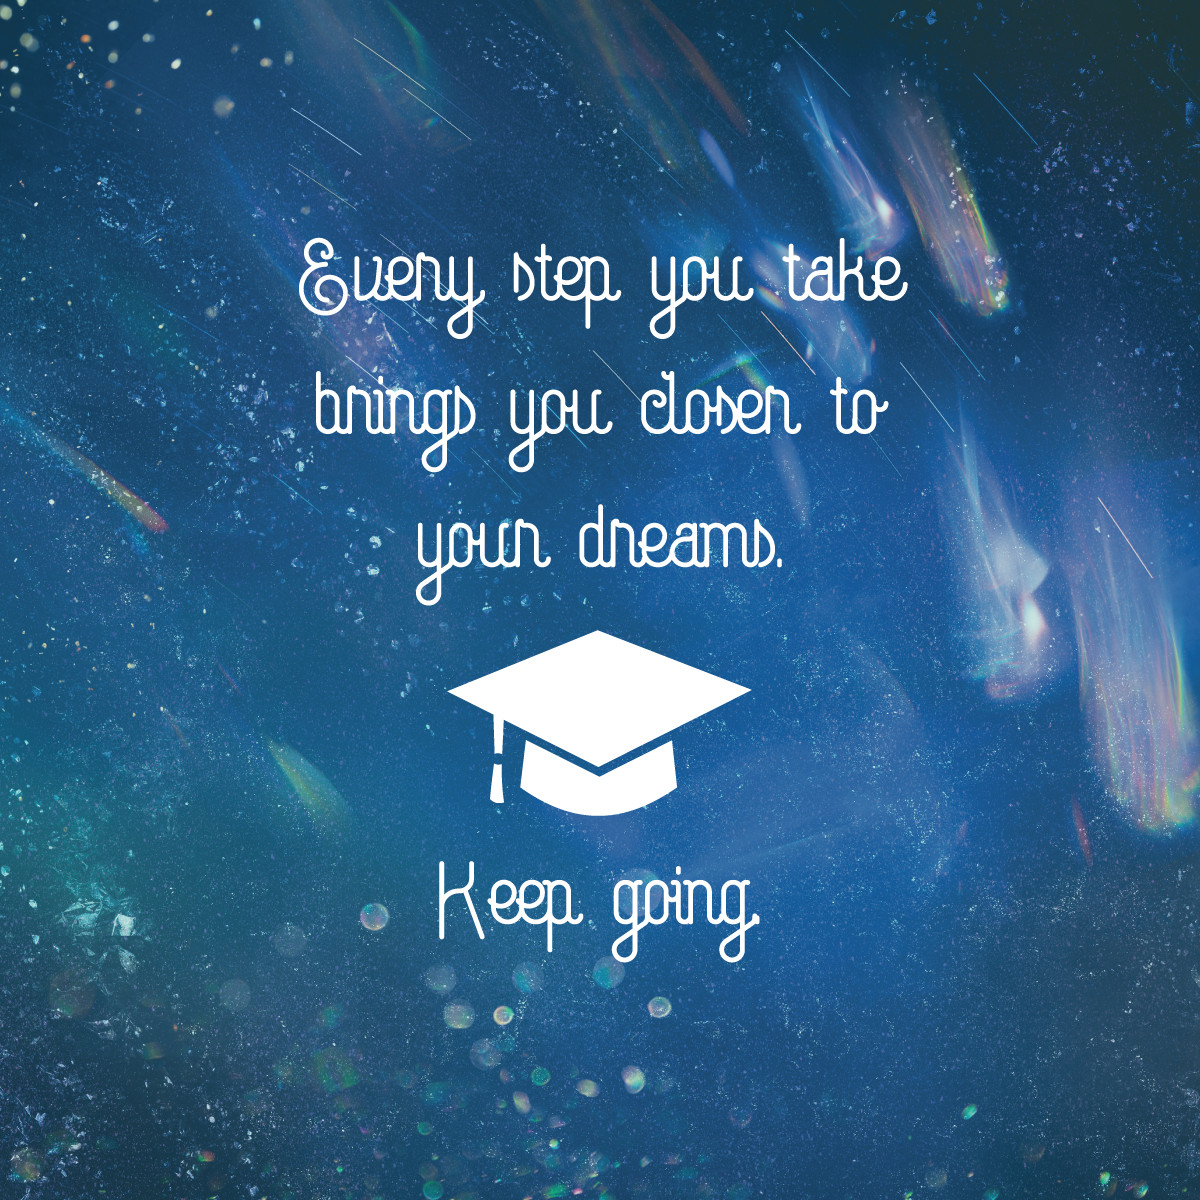 Graduation Wishes Quotes
 Congrats to all those graduating this month